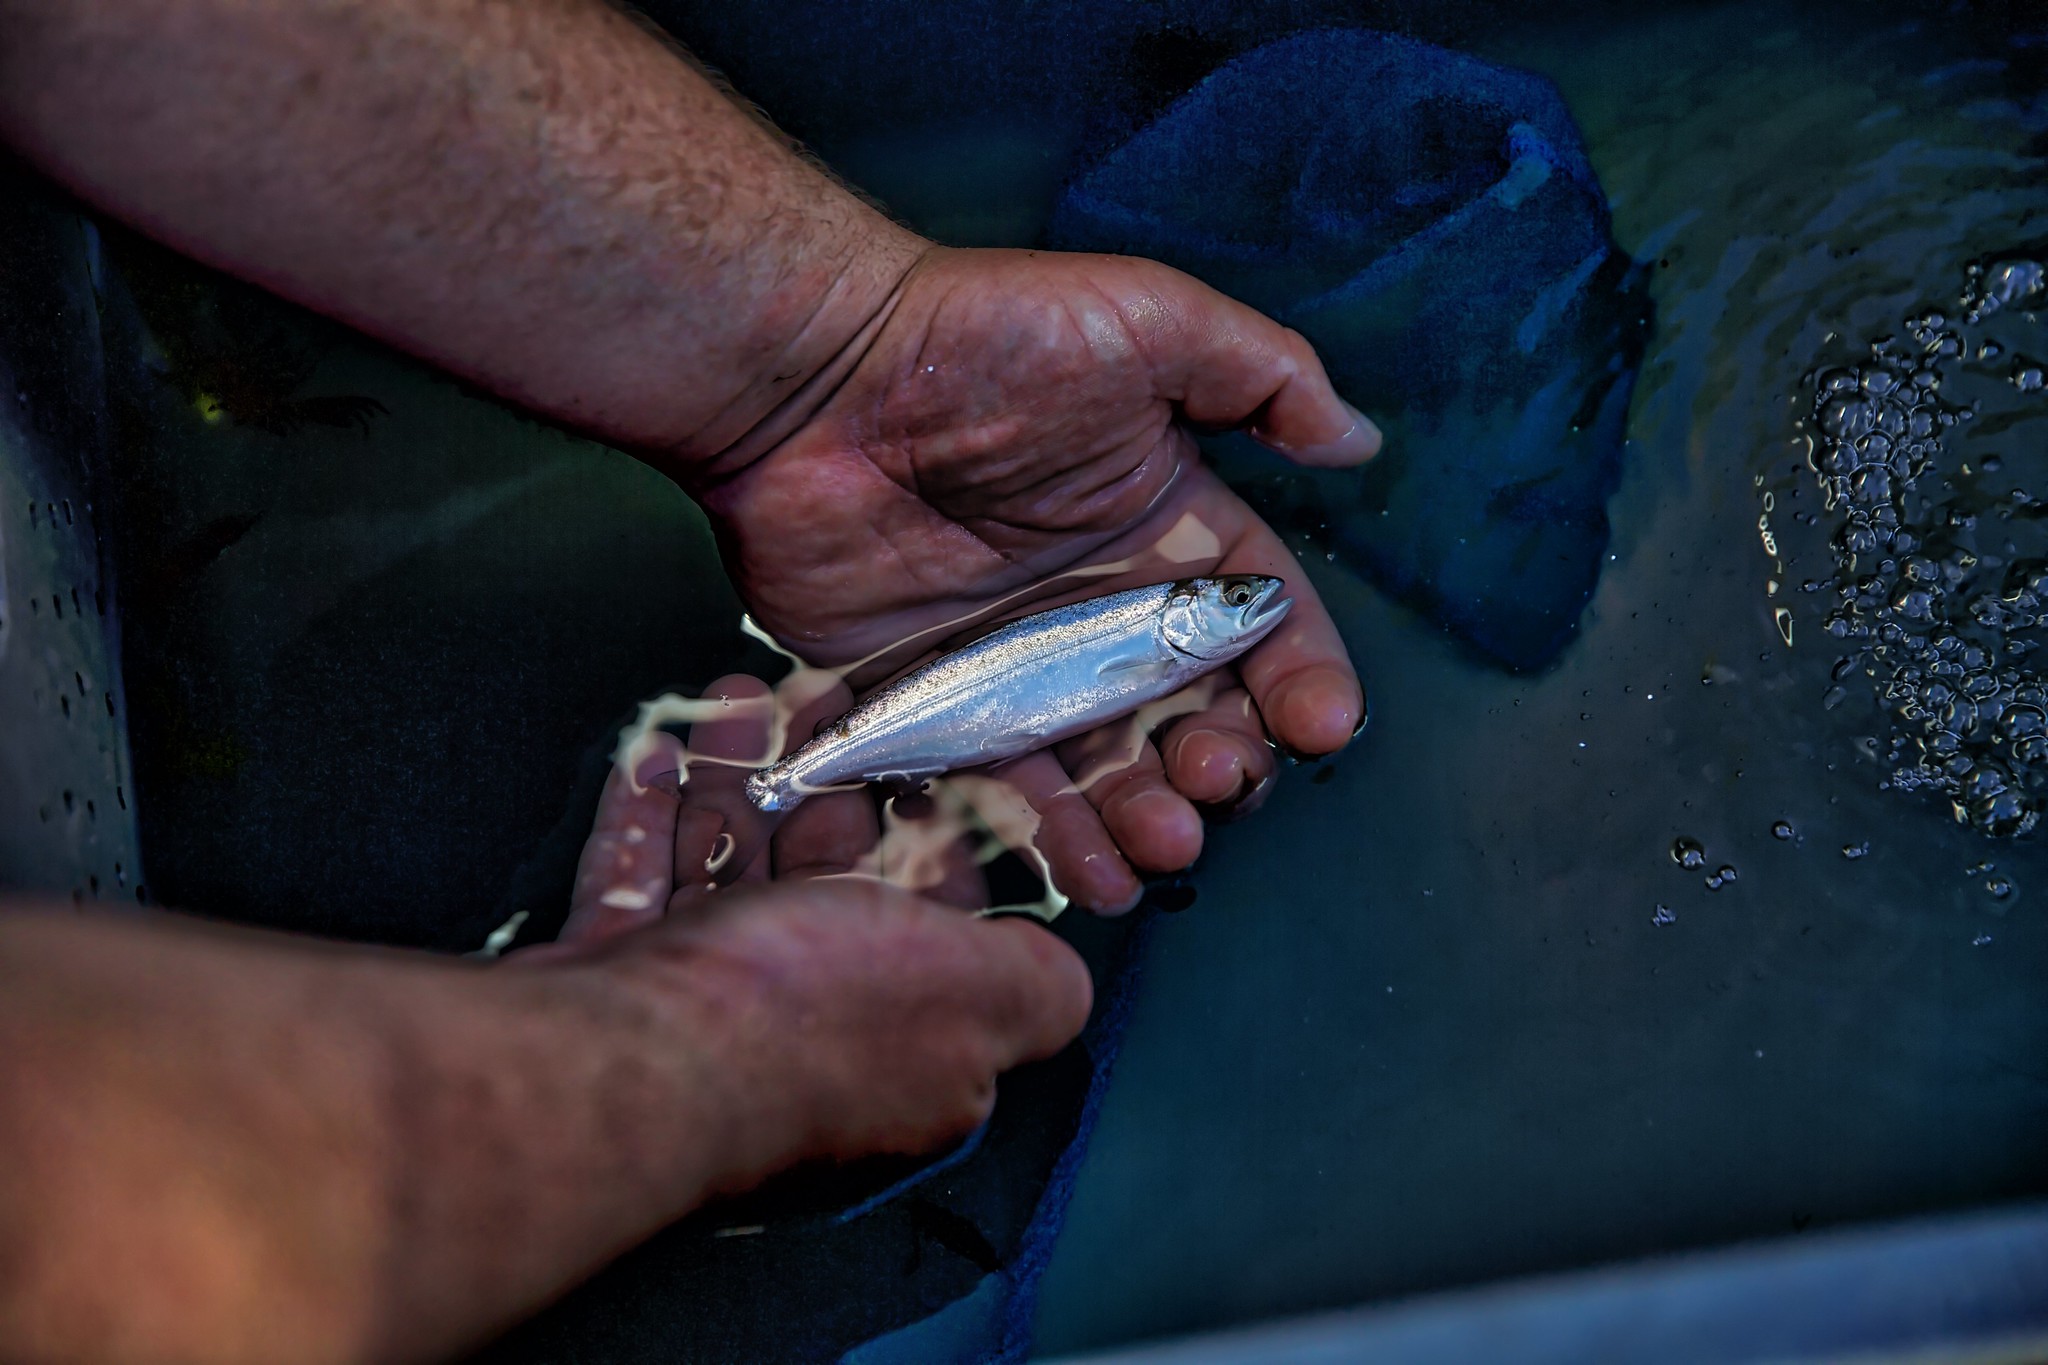 Warm Water, Drought Conditions Take Heavy Toll on Endangered Salmon in California - Outdoor Life